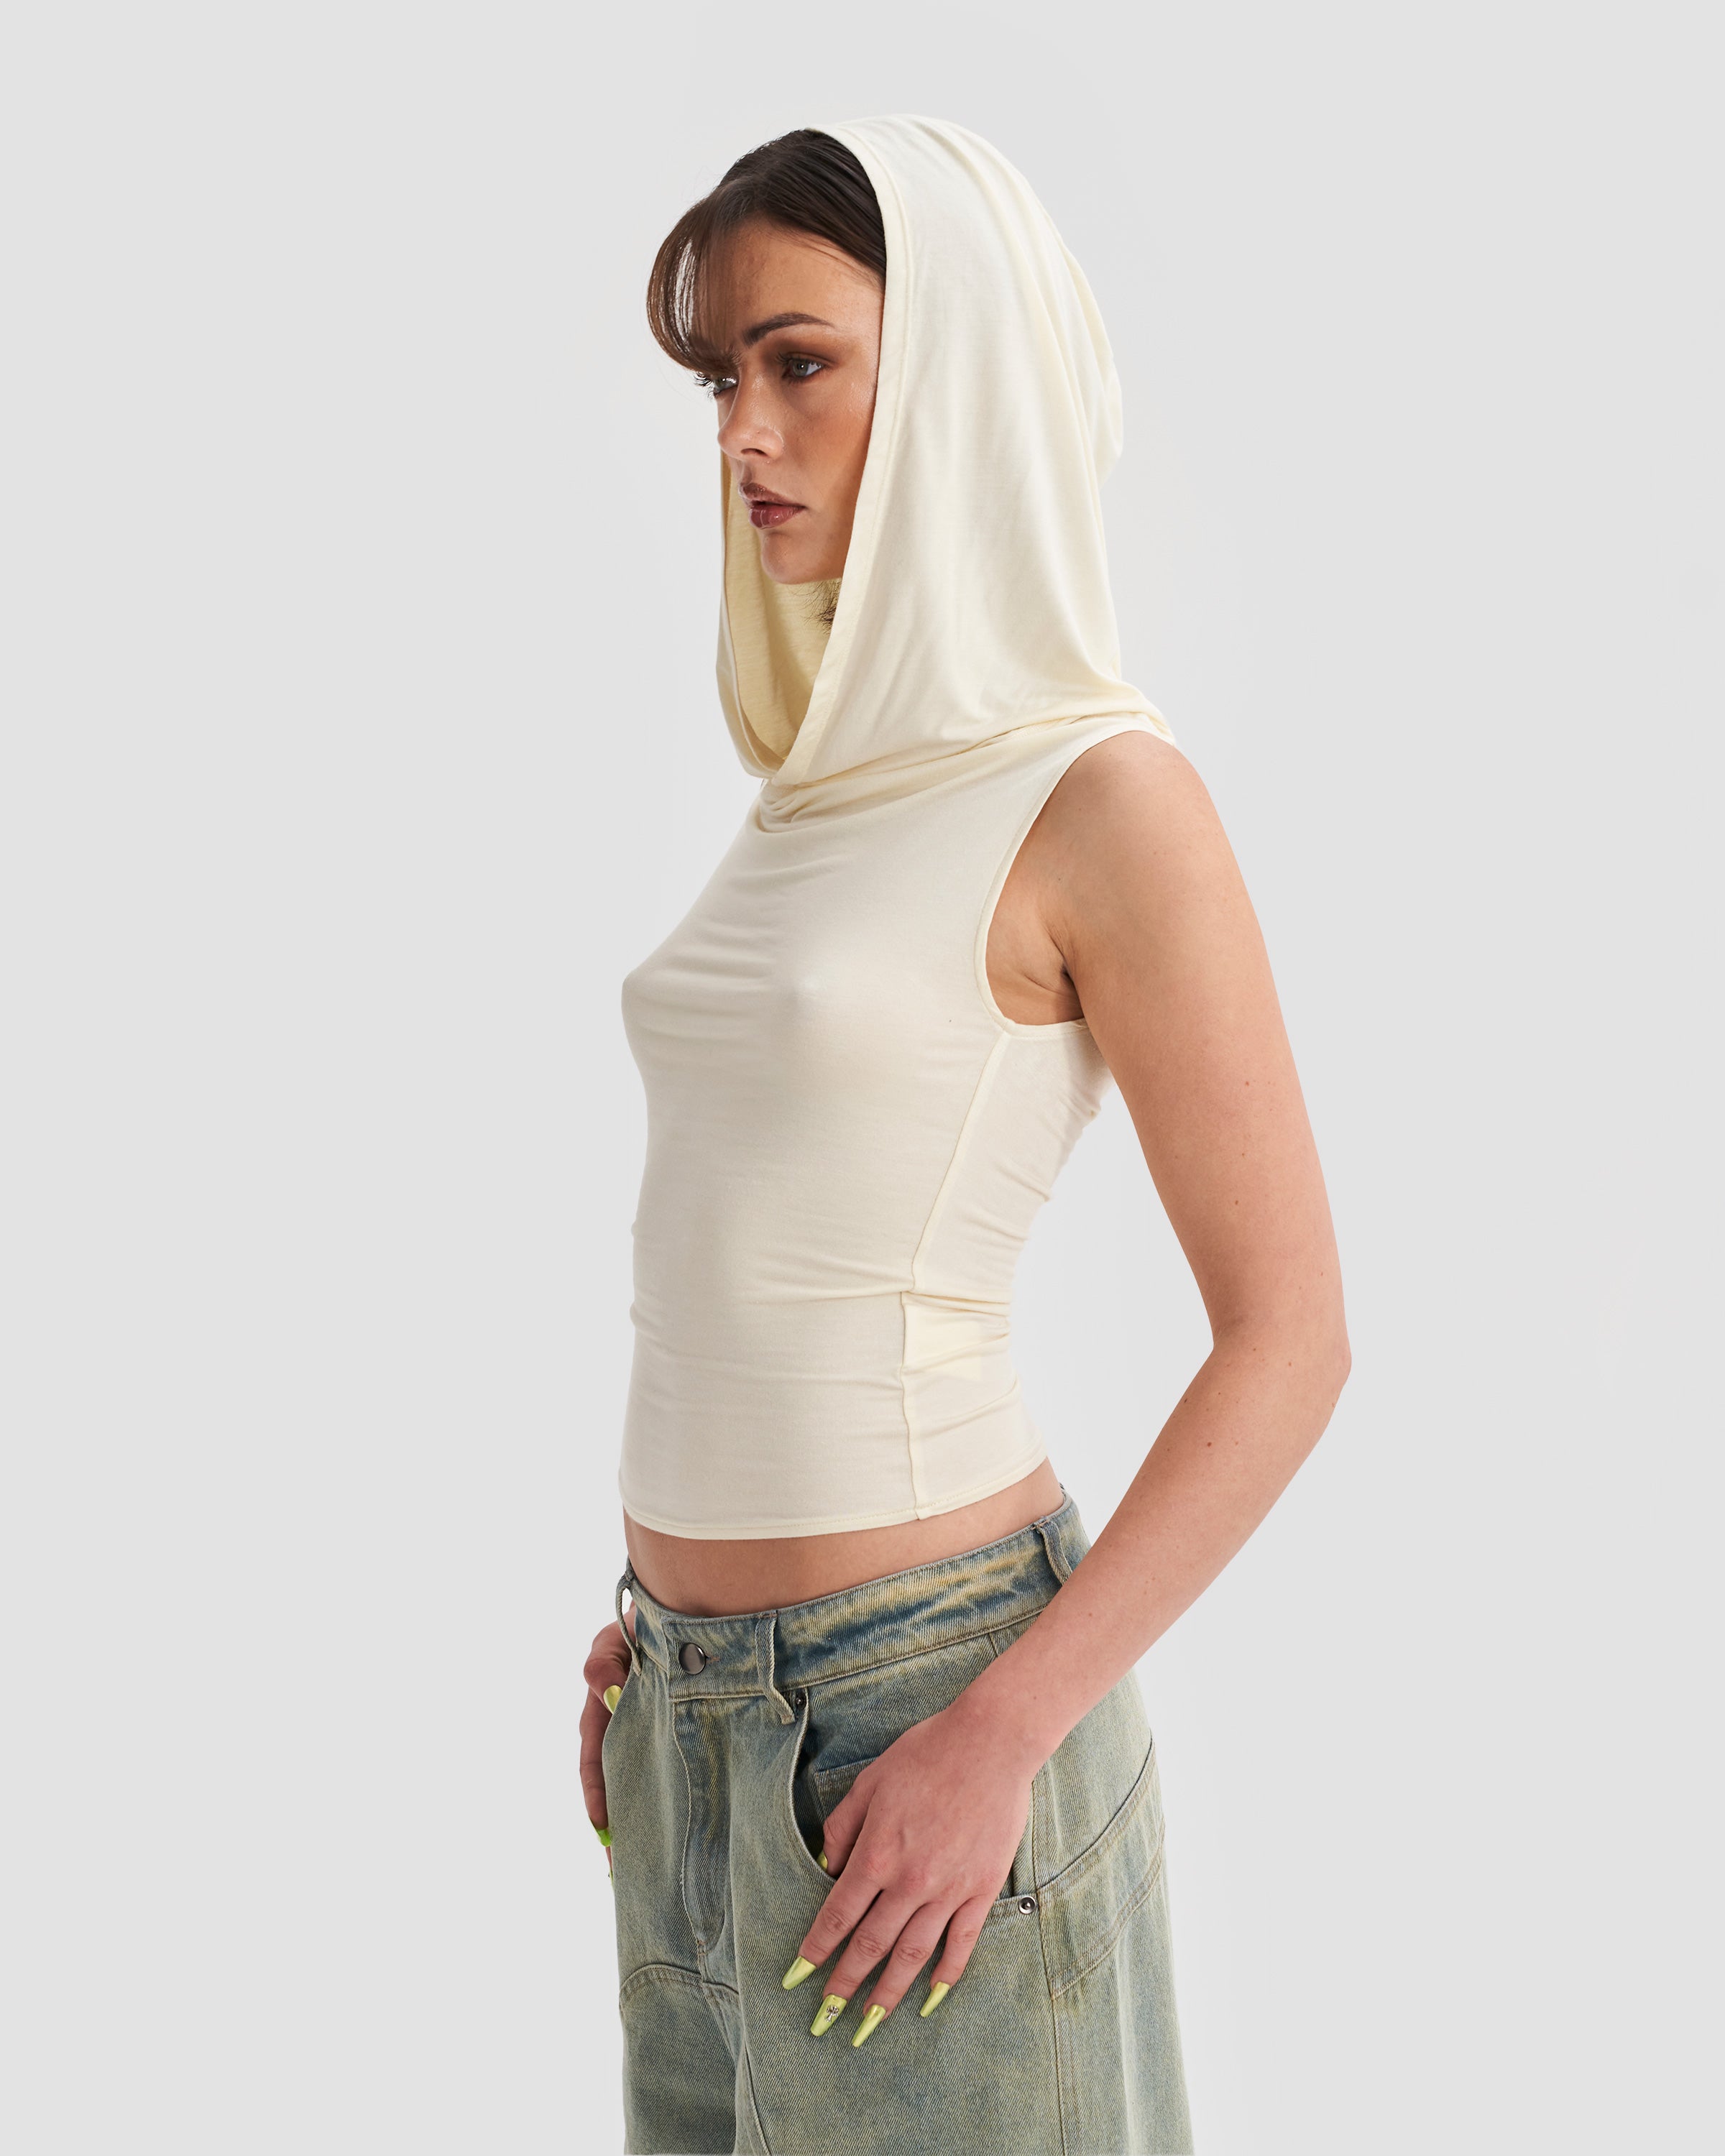 Image of Hooded Cowl Neck Tank Top in Cream